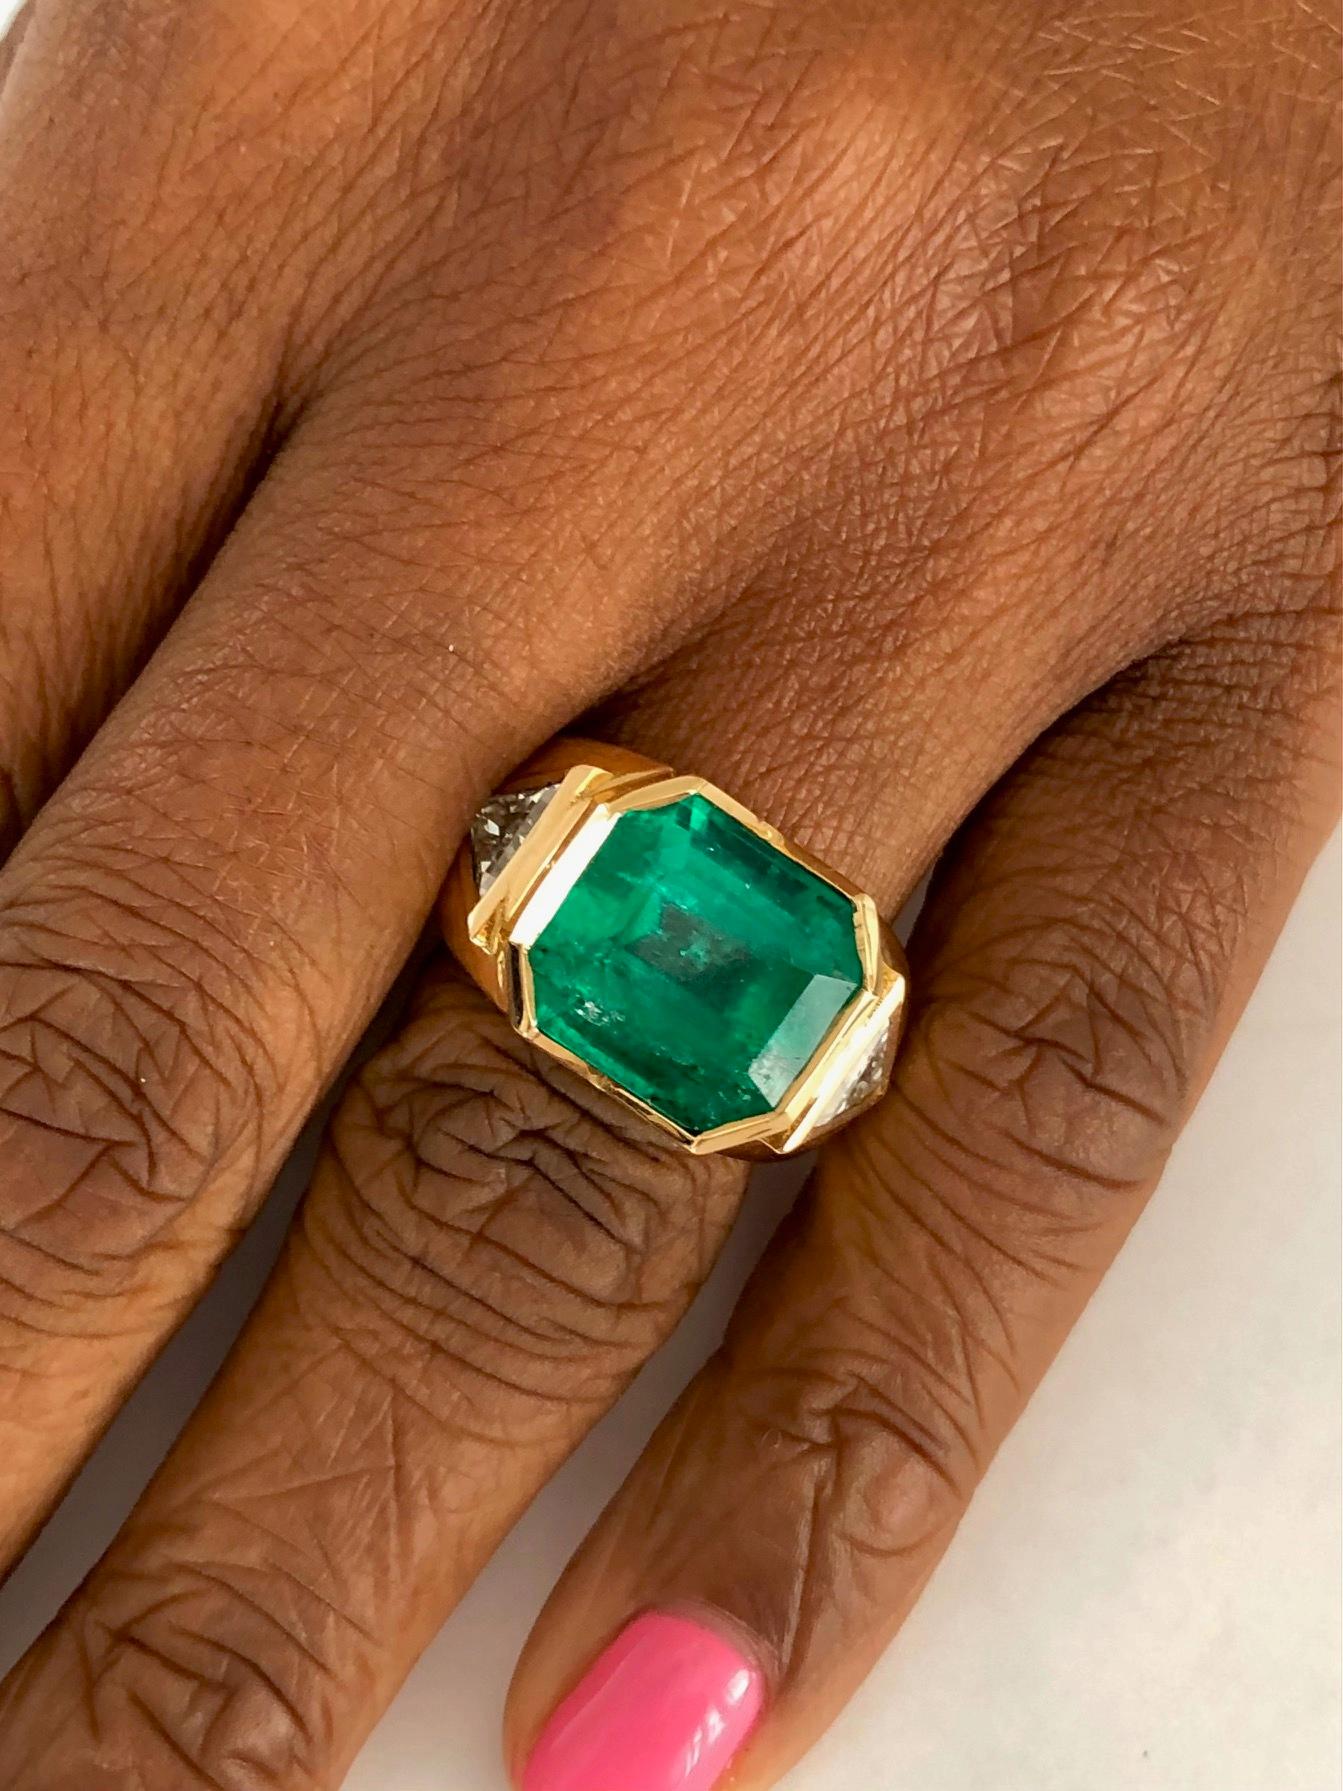 This one of a kind, handmade 18K Yellow Gold ring, set with a Colombian Emerald 8.41 carats and two Diamonds 0.93 carats.
Styled to look different than the cookie cutter look....

We design and manufacture our jewelry in our workshop, located in New